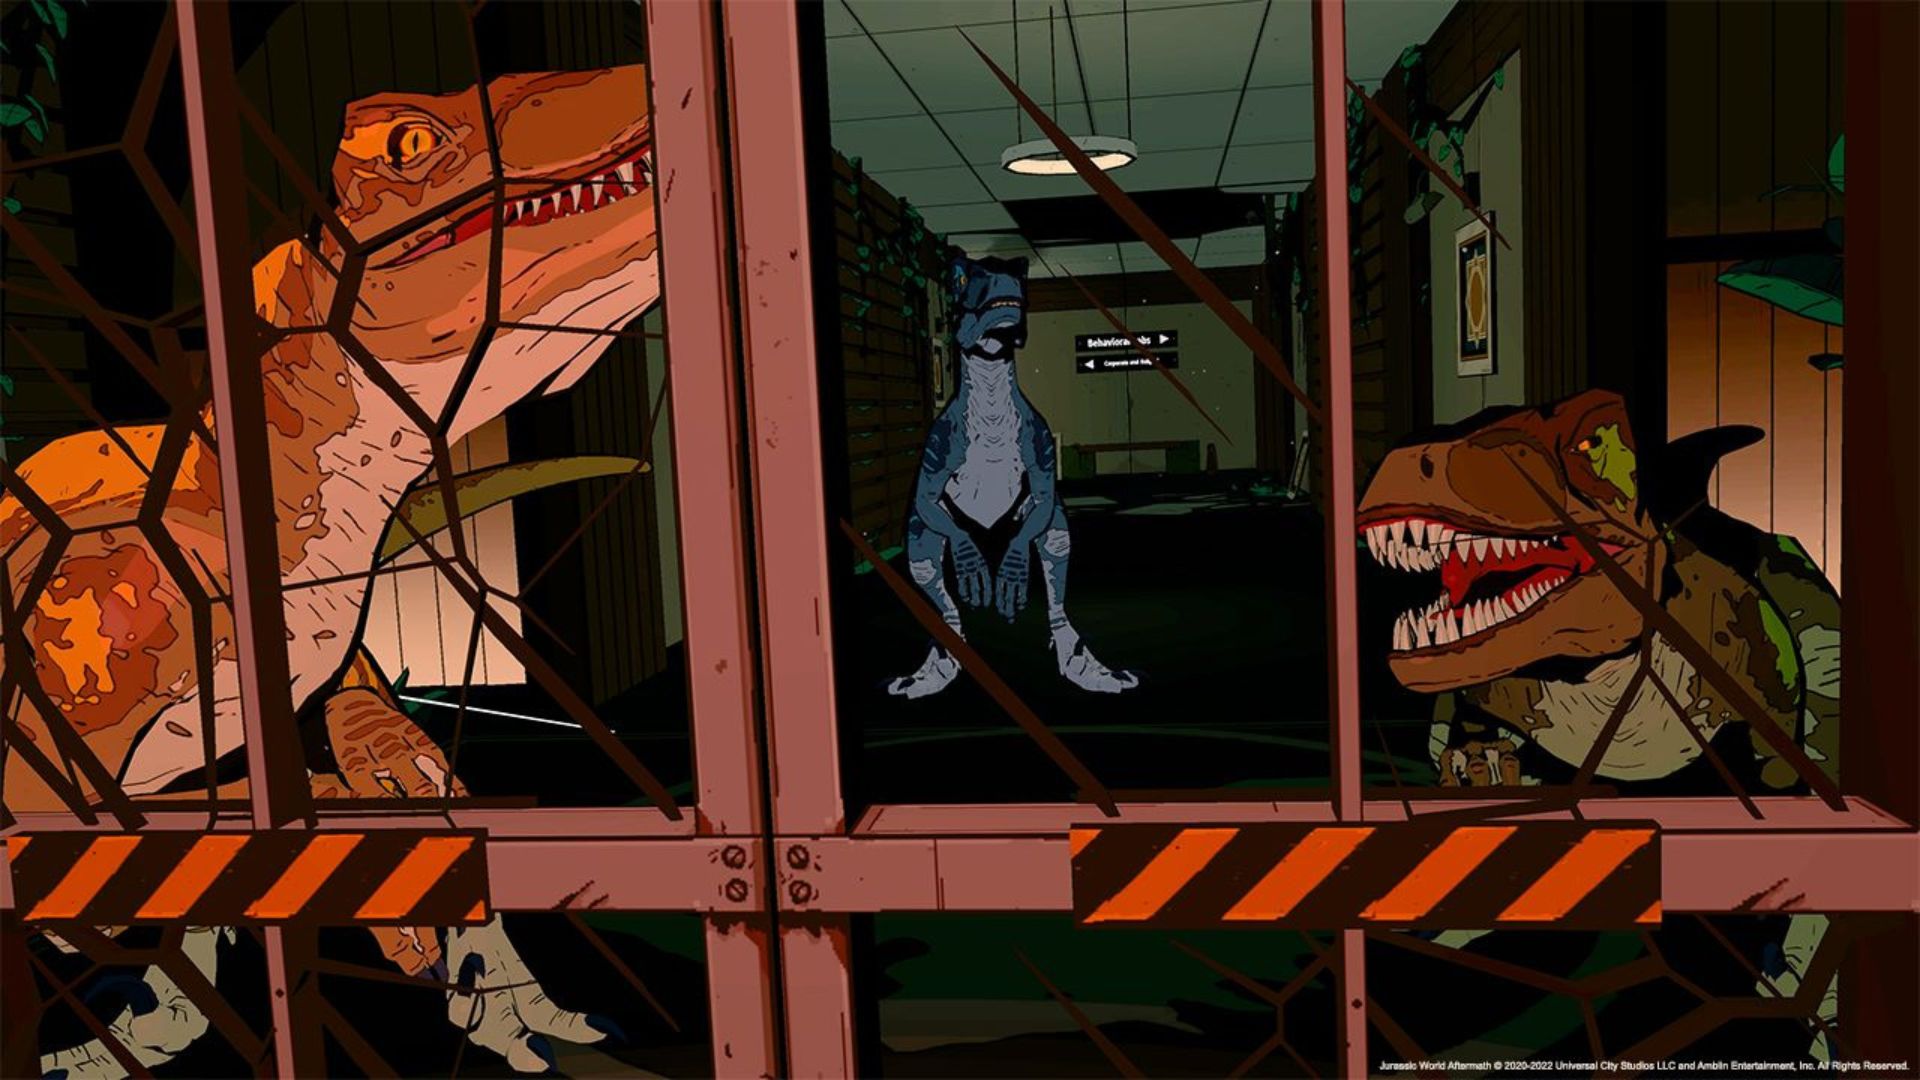 Jurassic World games - three t-rex behind some bars in a dark corridor, all different colours in a cartoony scene.